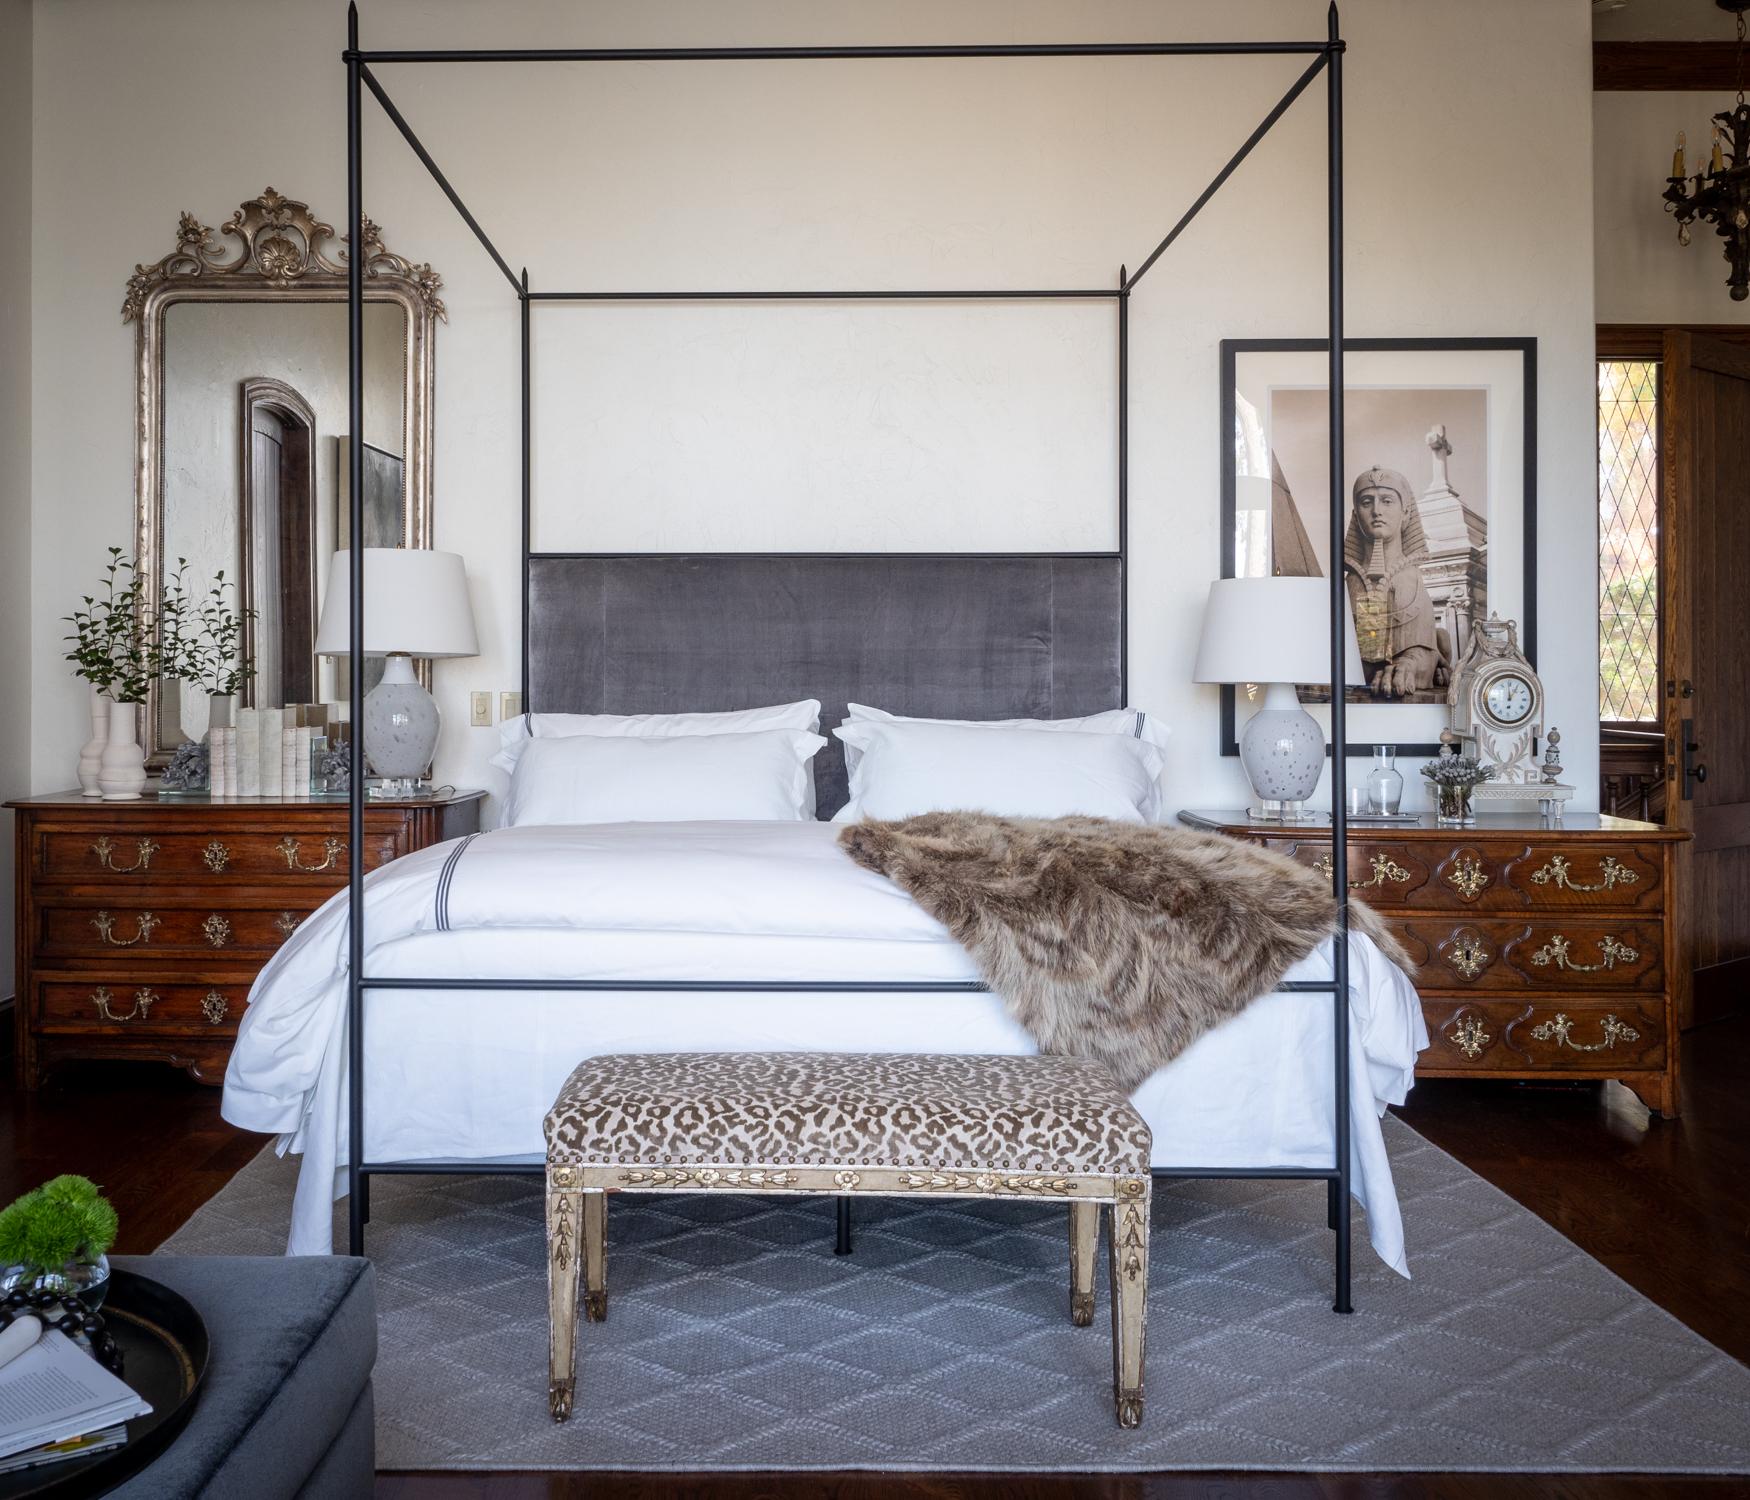 This Louis XVI style canopy bed with upholstered headboard is from the custom Tara Shaw Maison collection. Handcrafted in New Orleans. Standard headboard upholstered in a oyster heavyweight Belgian linen. Available in king, calking, queen and twin